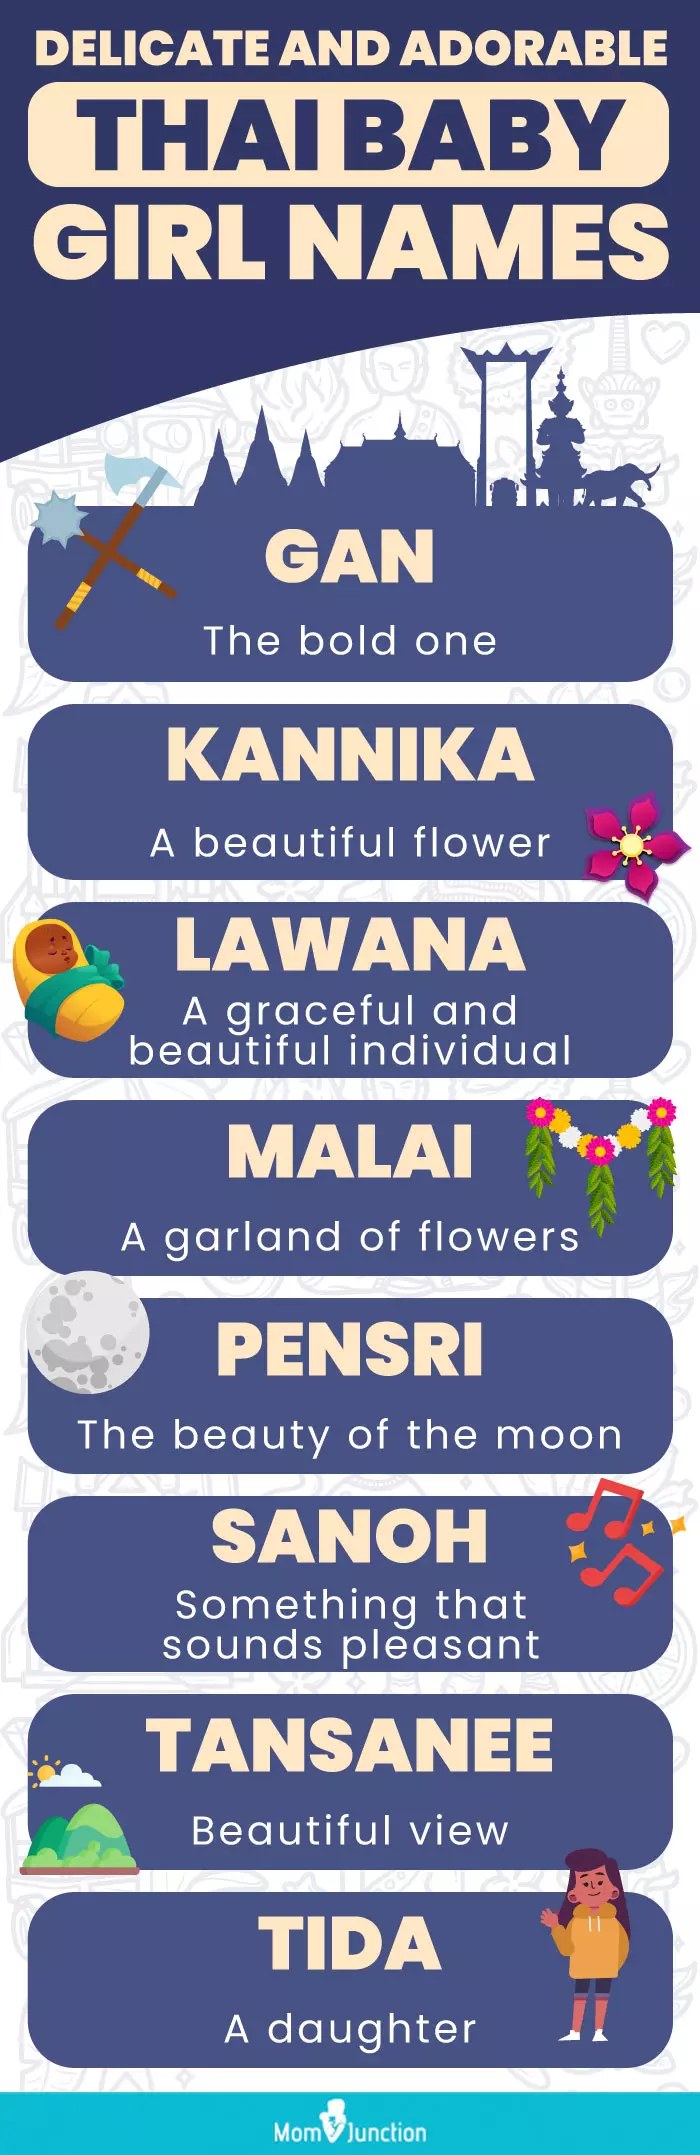 delicate and adorable thai baby girl names (infographic)